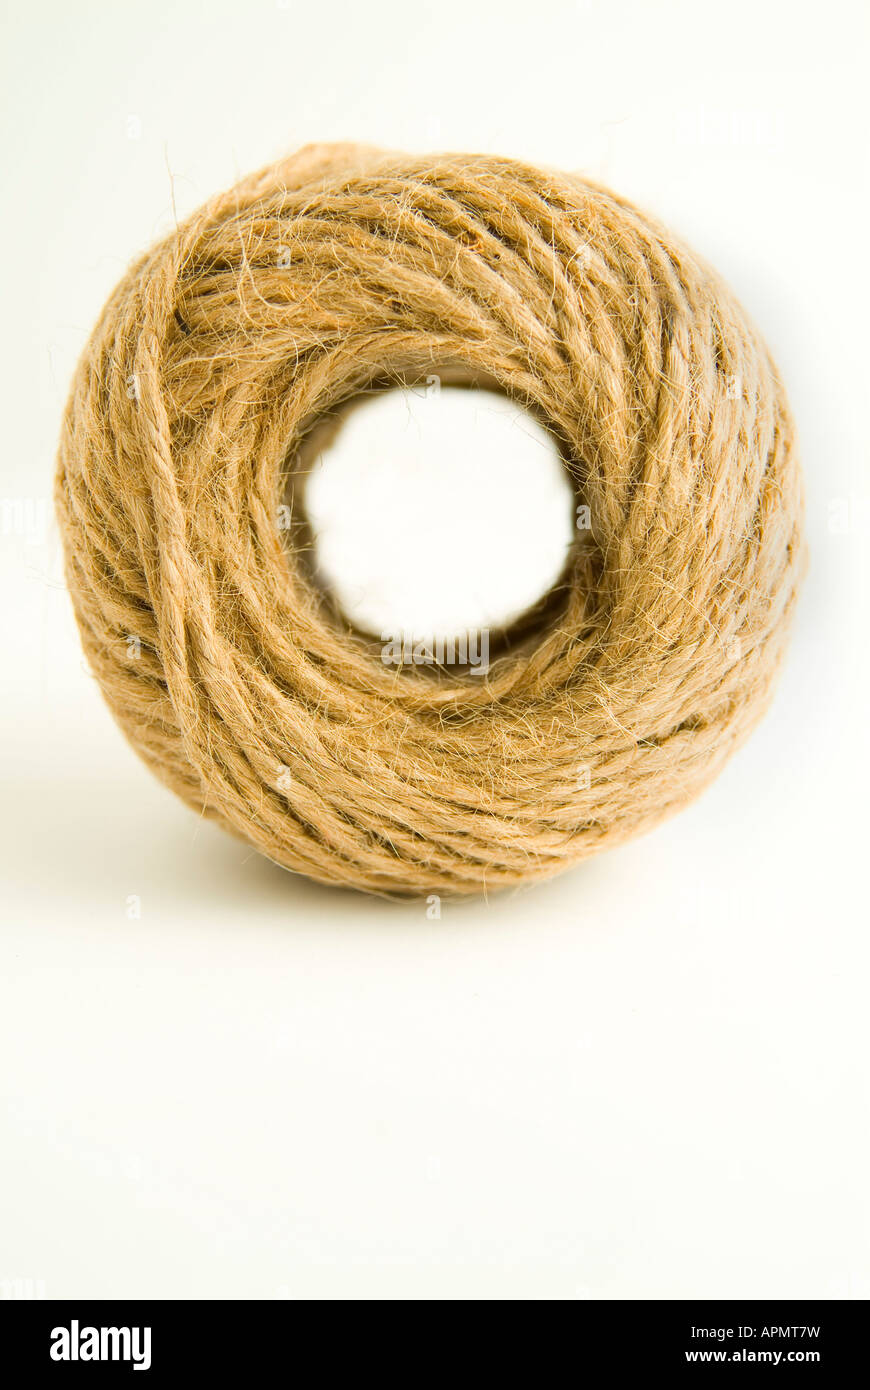 Close-Up Photograph of a Brown Twine Ball · Free Stock Photo